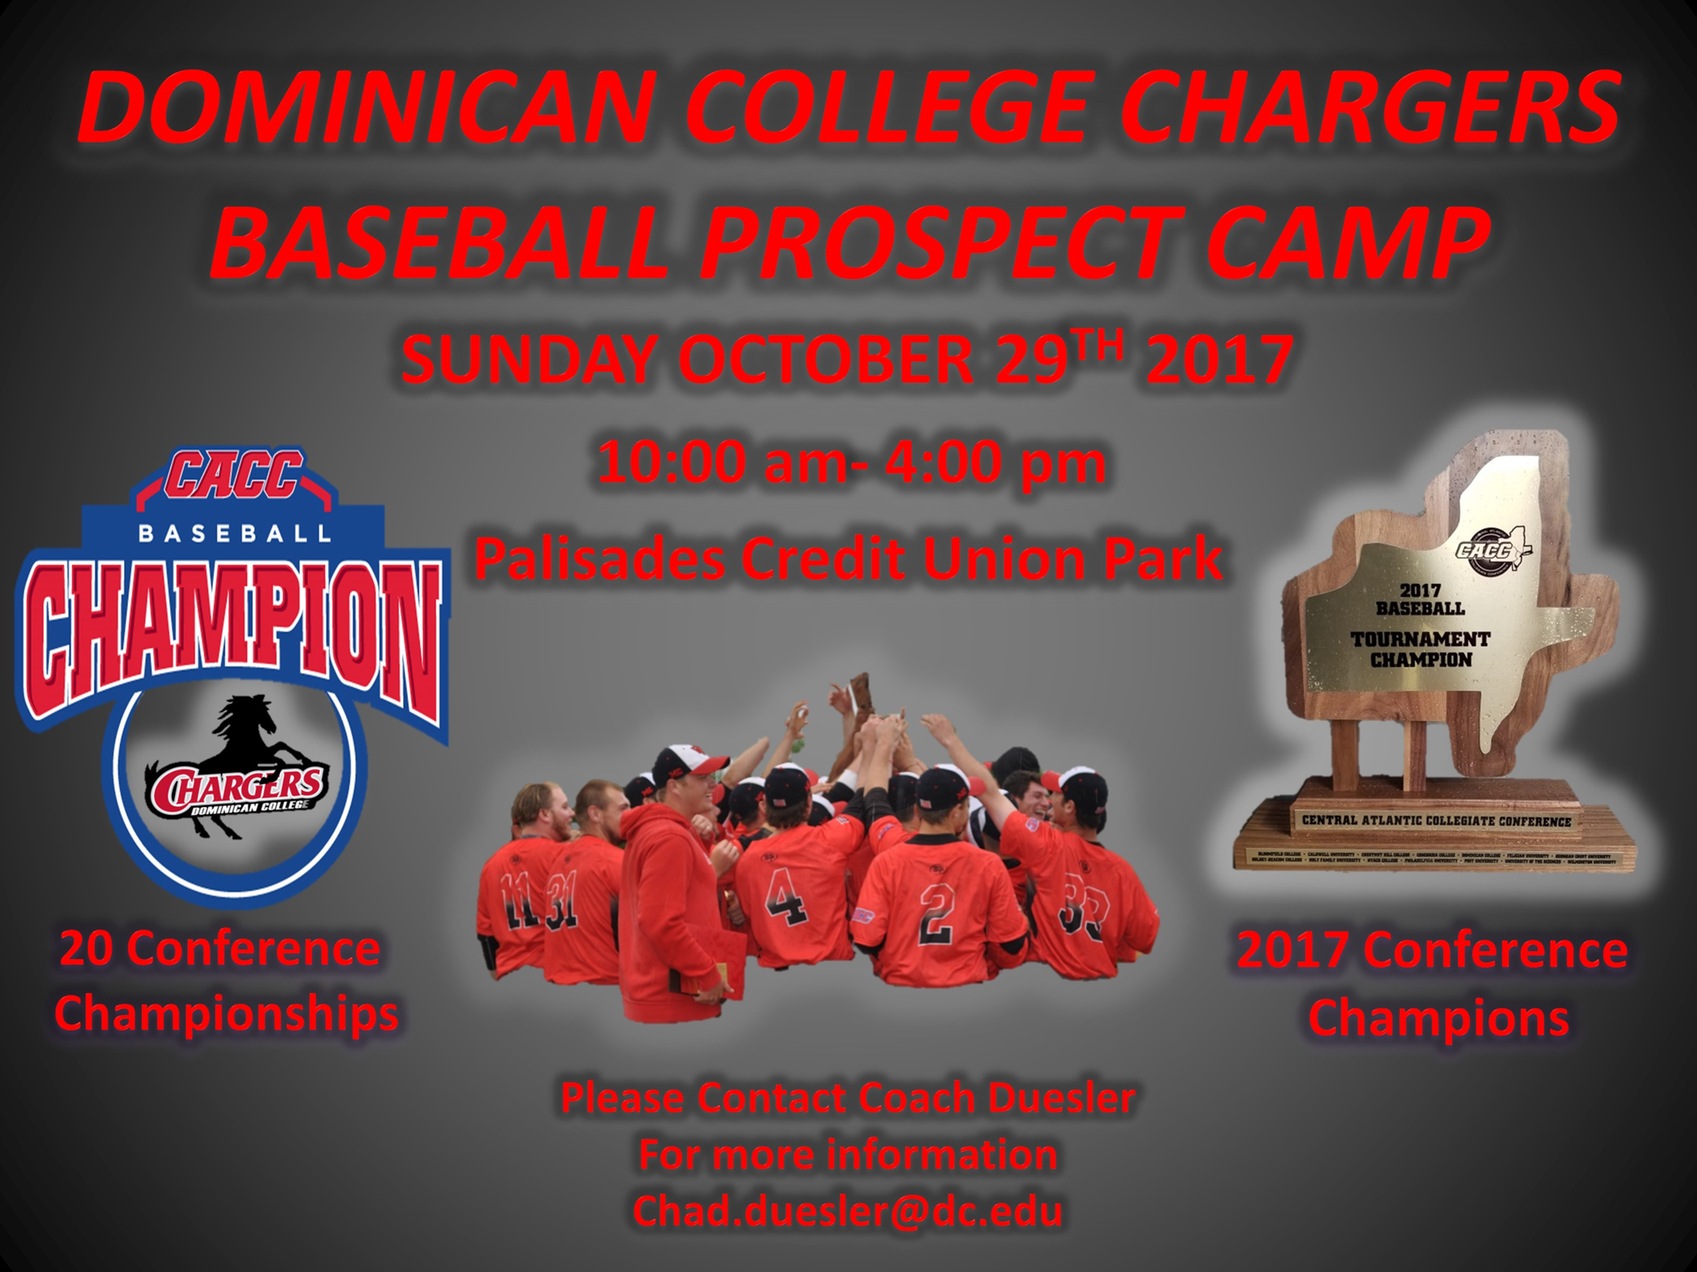 BASEBALL TO HOLD PROSPECT CAMP